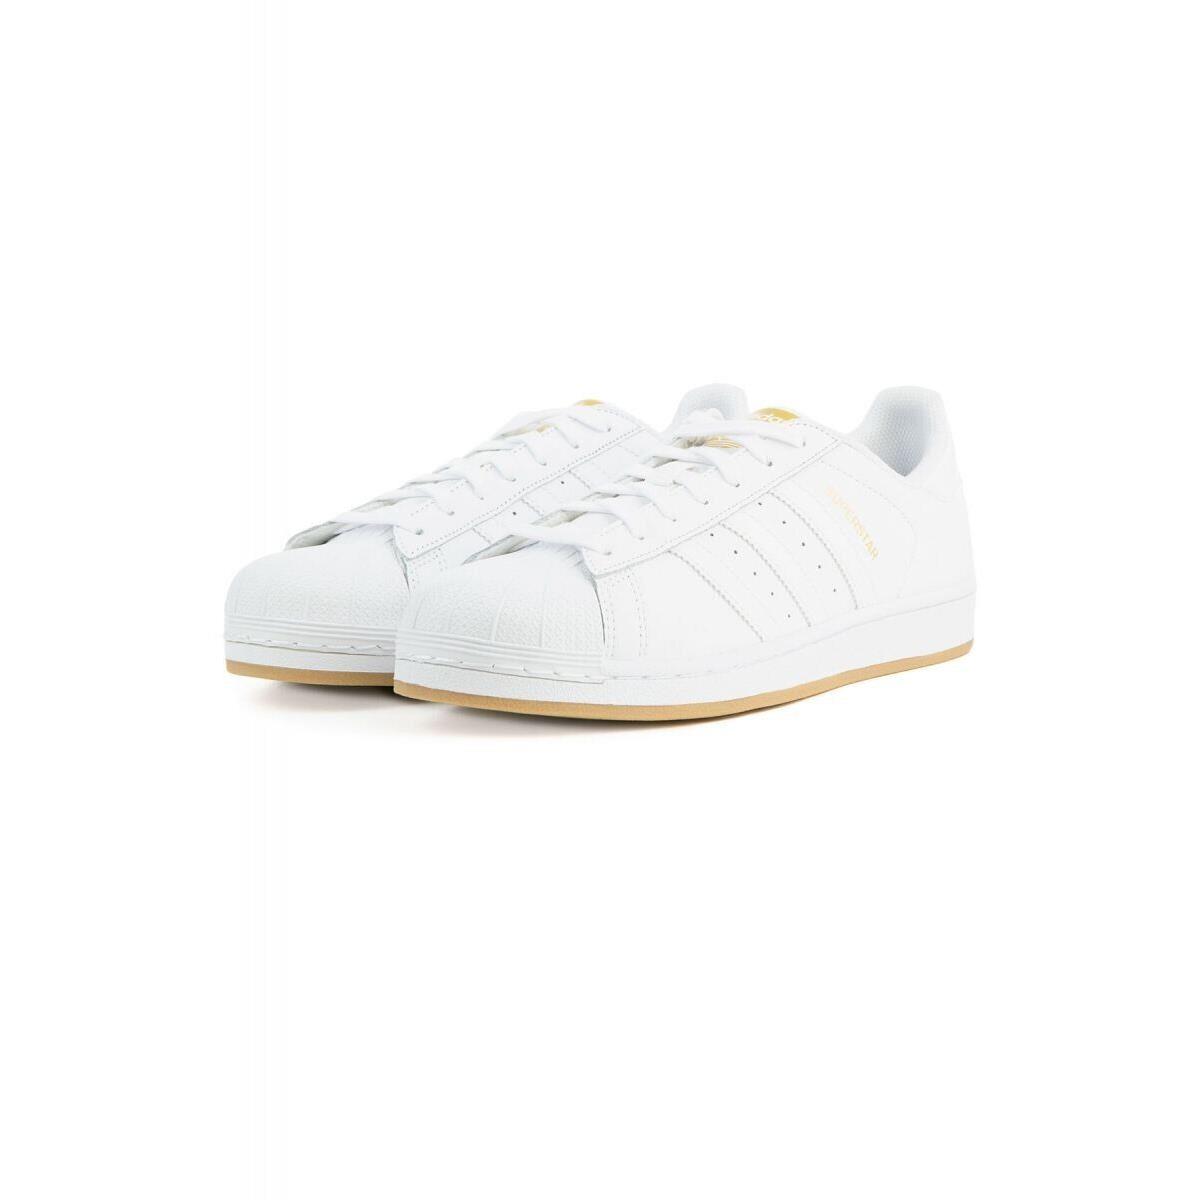 Adidas Superstar BY4357 Men`s White/gold Leather Sneaker Shoes Size 12 HS4679